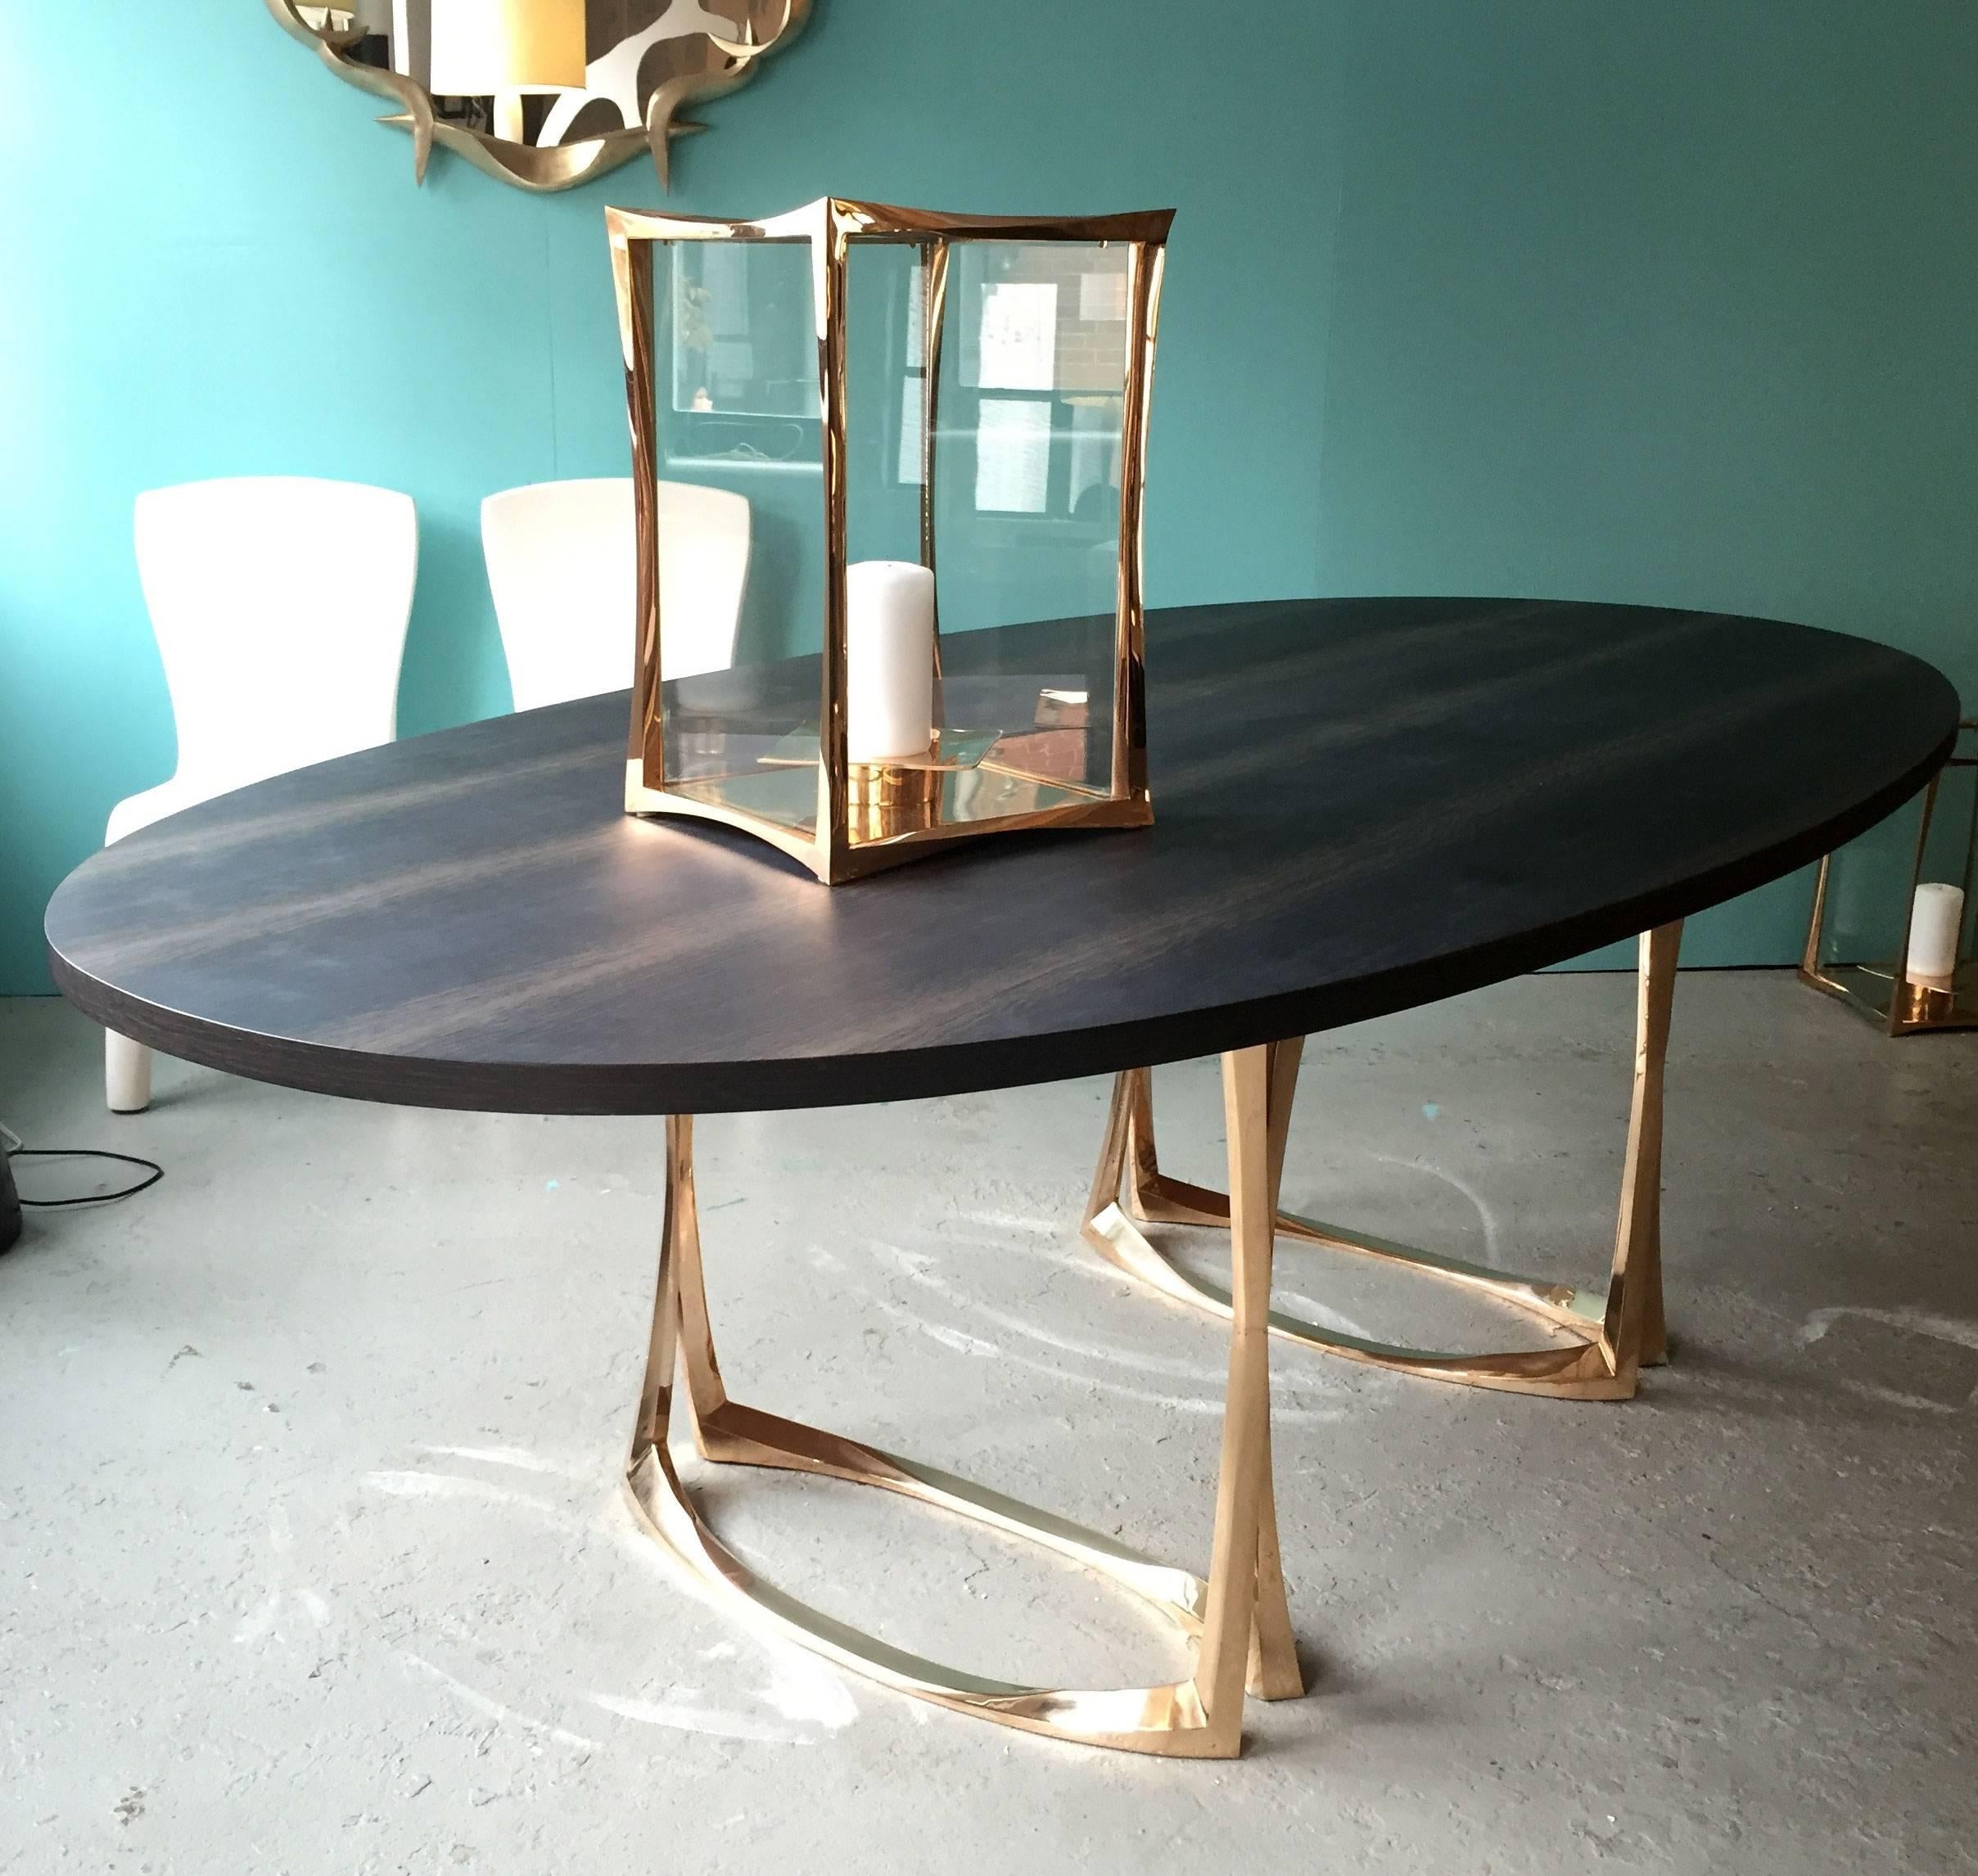 Elegant jewel like dining table by Anasthasia Millot.

The legs consist of two enlaced bronze stems forming ovals on the floor. 
The top is an oval in marsh oak.